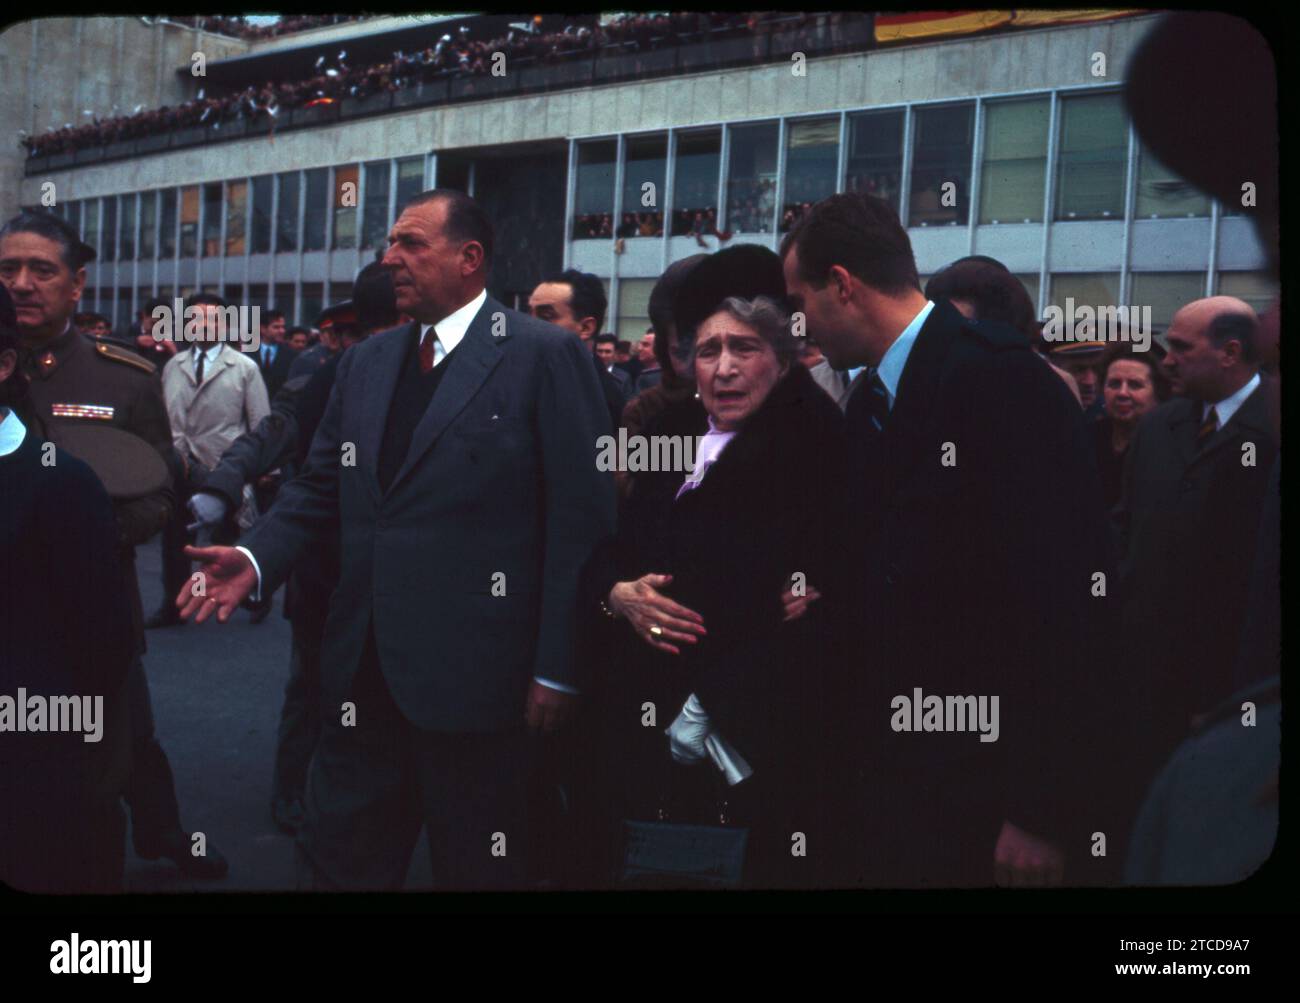 Madrid, 02/11/1968. Queen Victoria Eugenia visits Madrid on the occasion of the birth of her great-grandson, the Infante Don Felipe. In the image, farewell at Barajas Airport. With her, her son, Don Juan de Borbón, and her grandson, Prince Juan Carlos. Credit: Album / Archivo ABC / Jaime Pato,Álvaro García Pelayo,José Sánchez Martínez Stock Photo